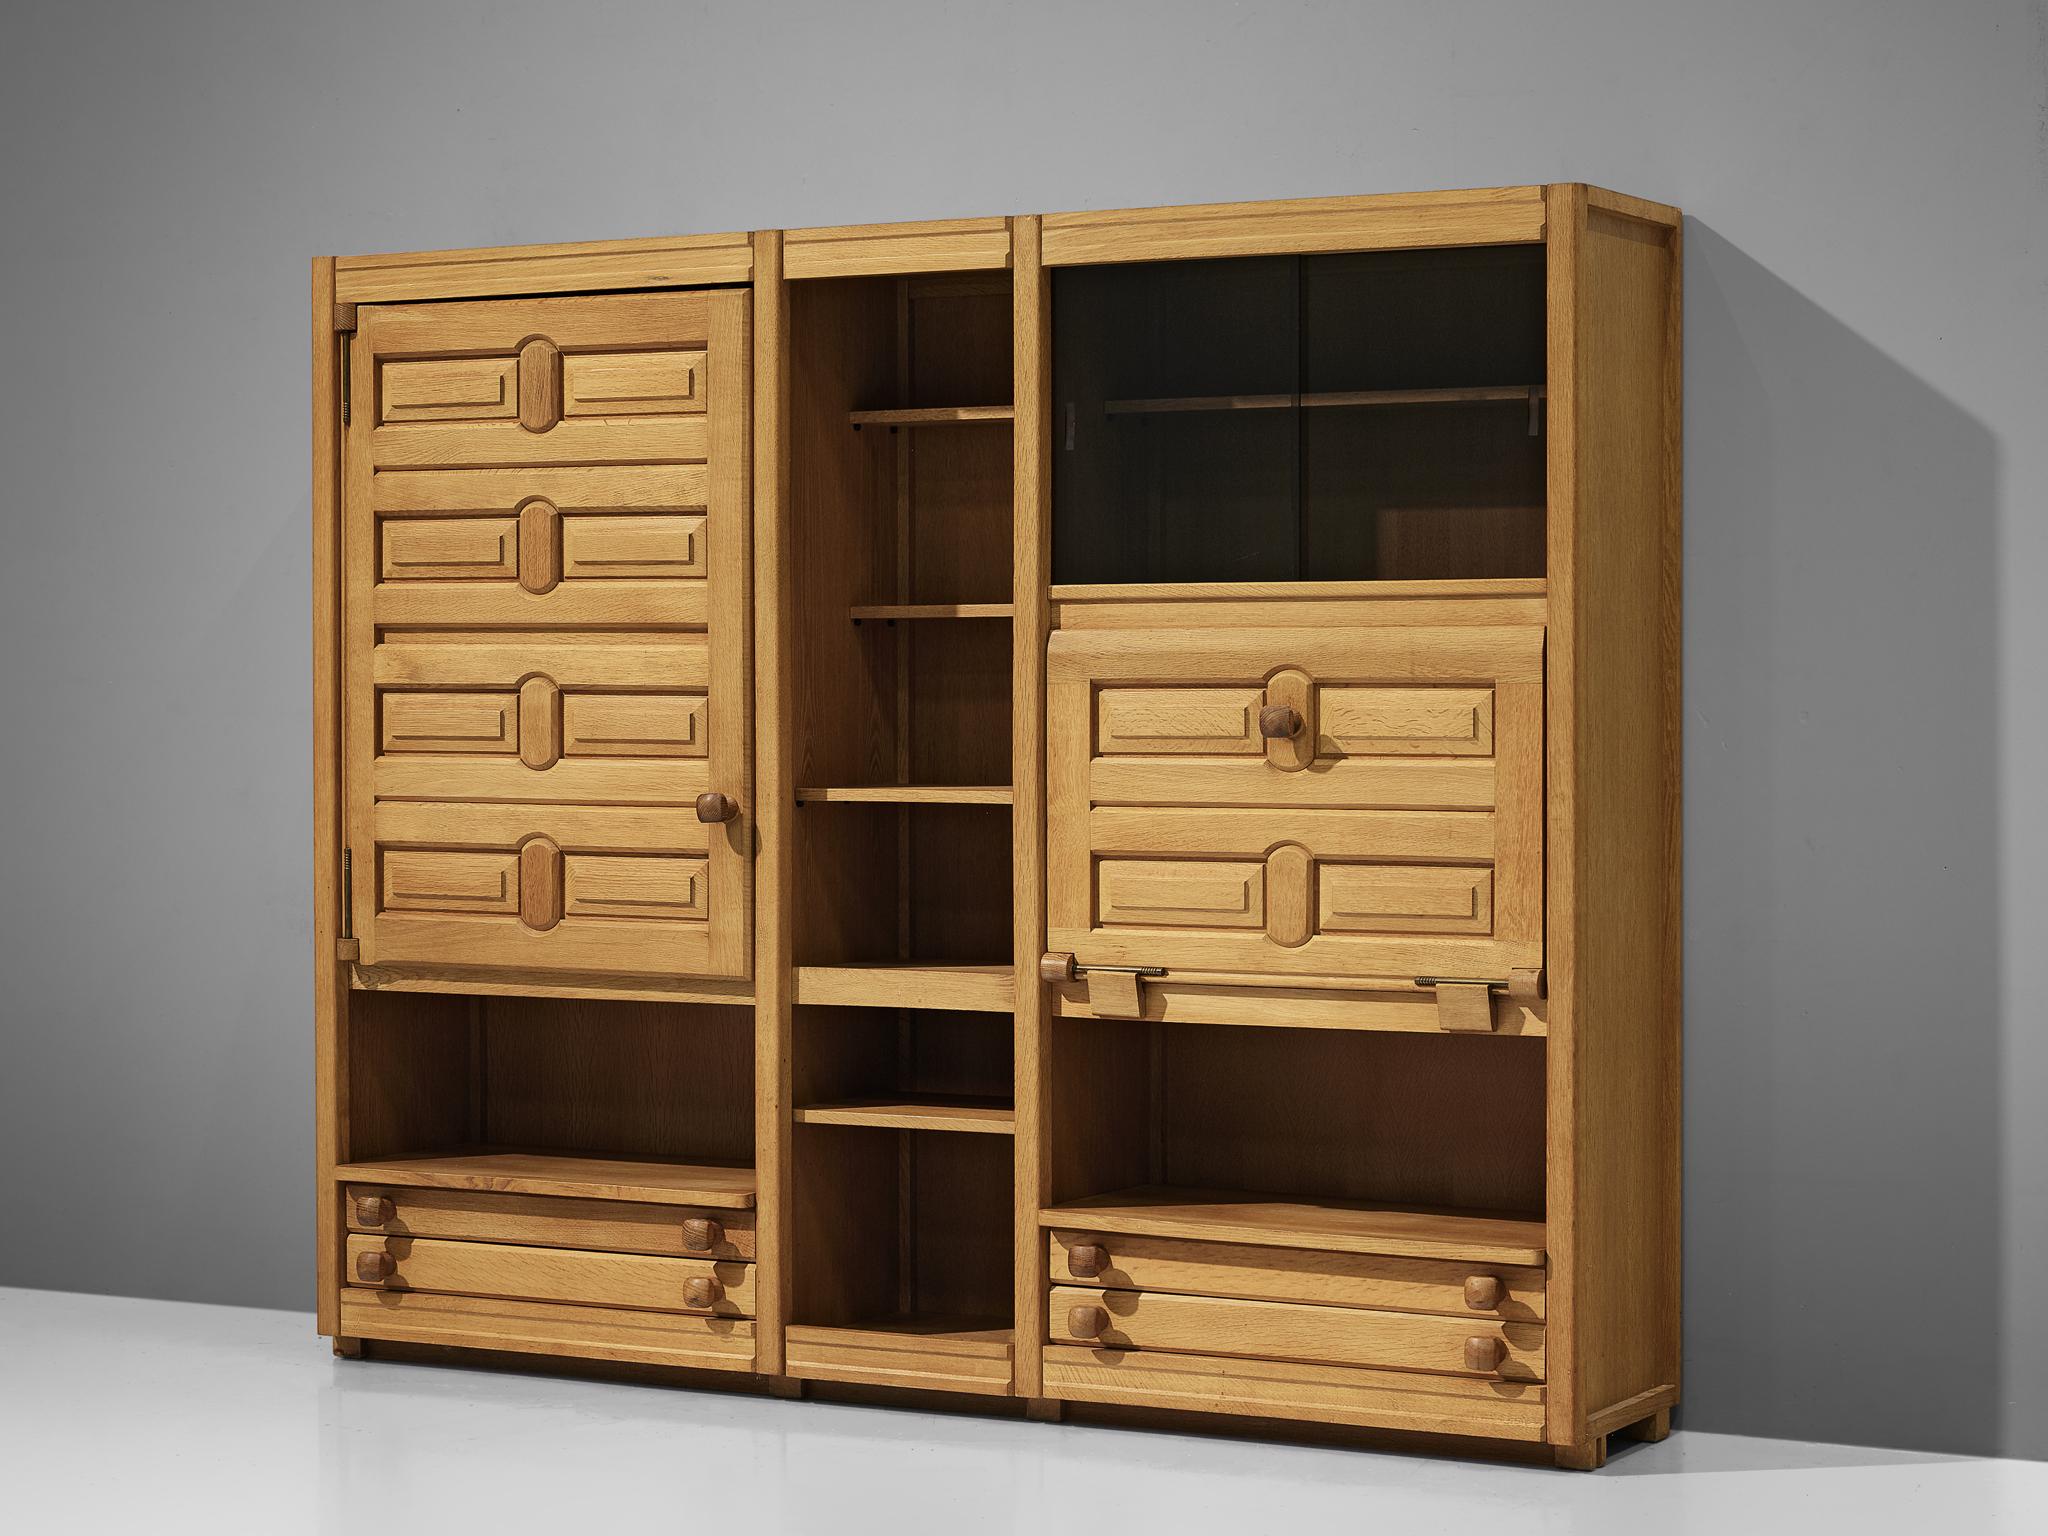 Guillerme and Chambron, highboard, oak, France, 1960s.

This case piece is designed by Guillerme and Chambron and features geometric engravings on the many different storage spaces such like drawers and shelves. The piece is typical for the design